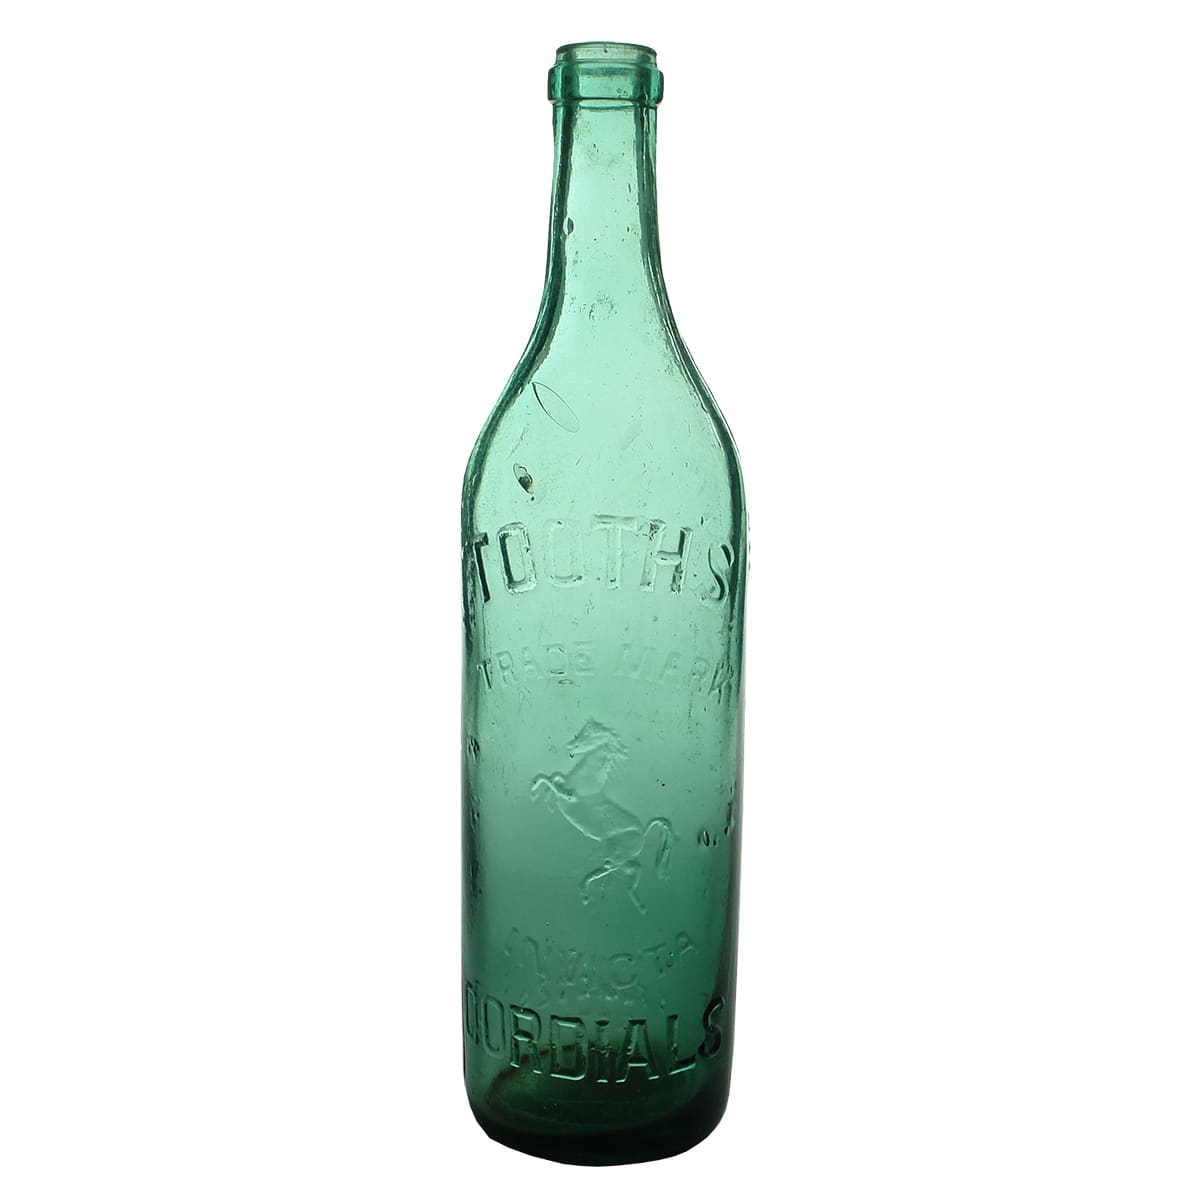 Cordial. Tooth's Invicta Cordials. Sydney. No base mark. Light Green. 26 oz. (New South Wales)